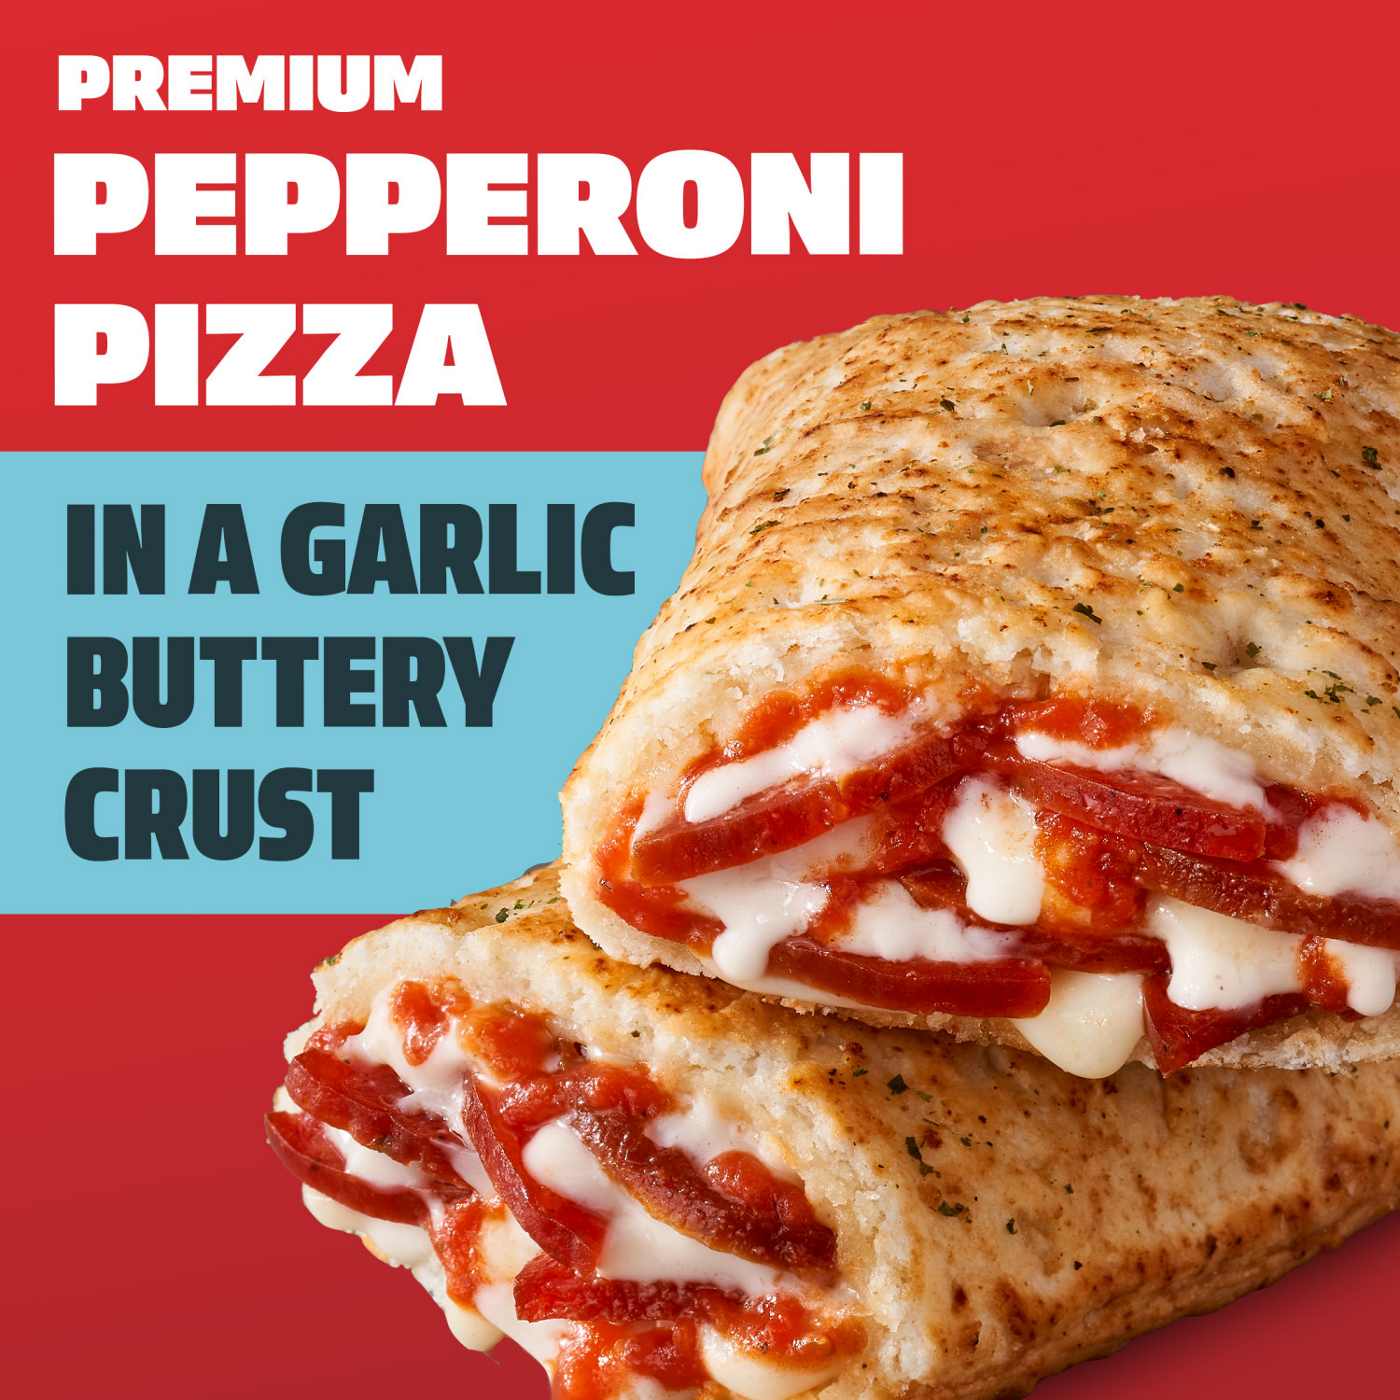 Hot Pockets Pepperoni Pizza Garlic Buttery Crust Frozen Sandwiches - Shop  Entrees & Sides at H-E-B